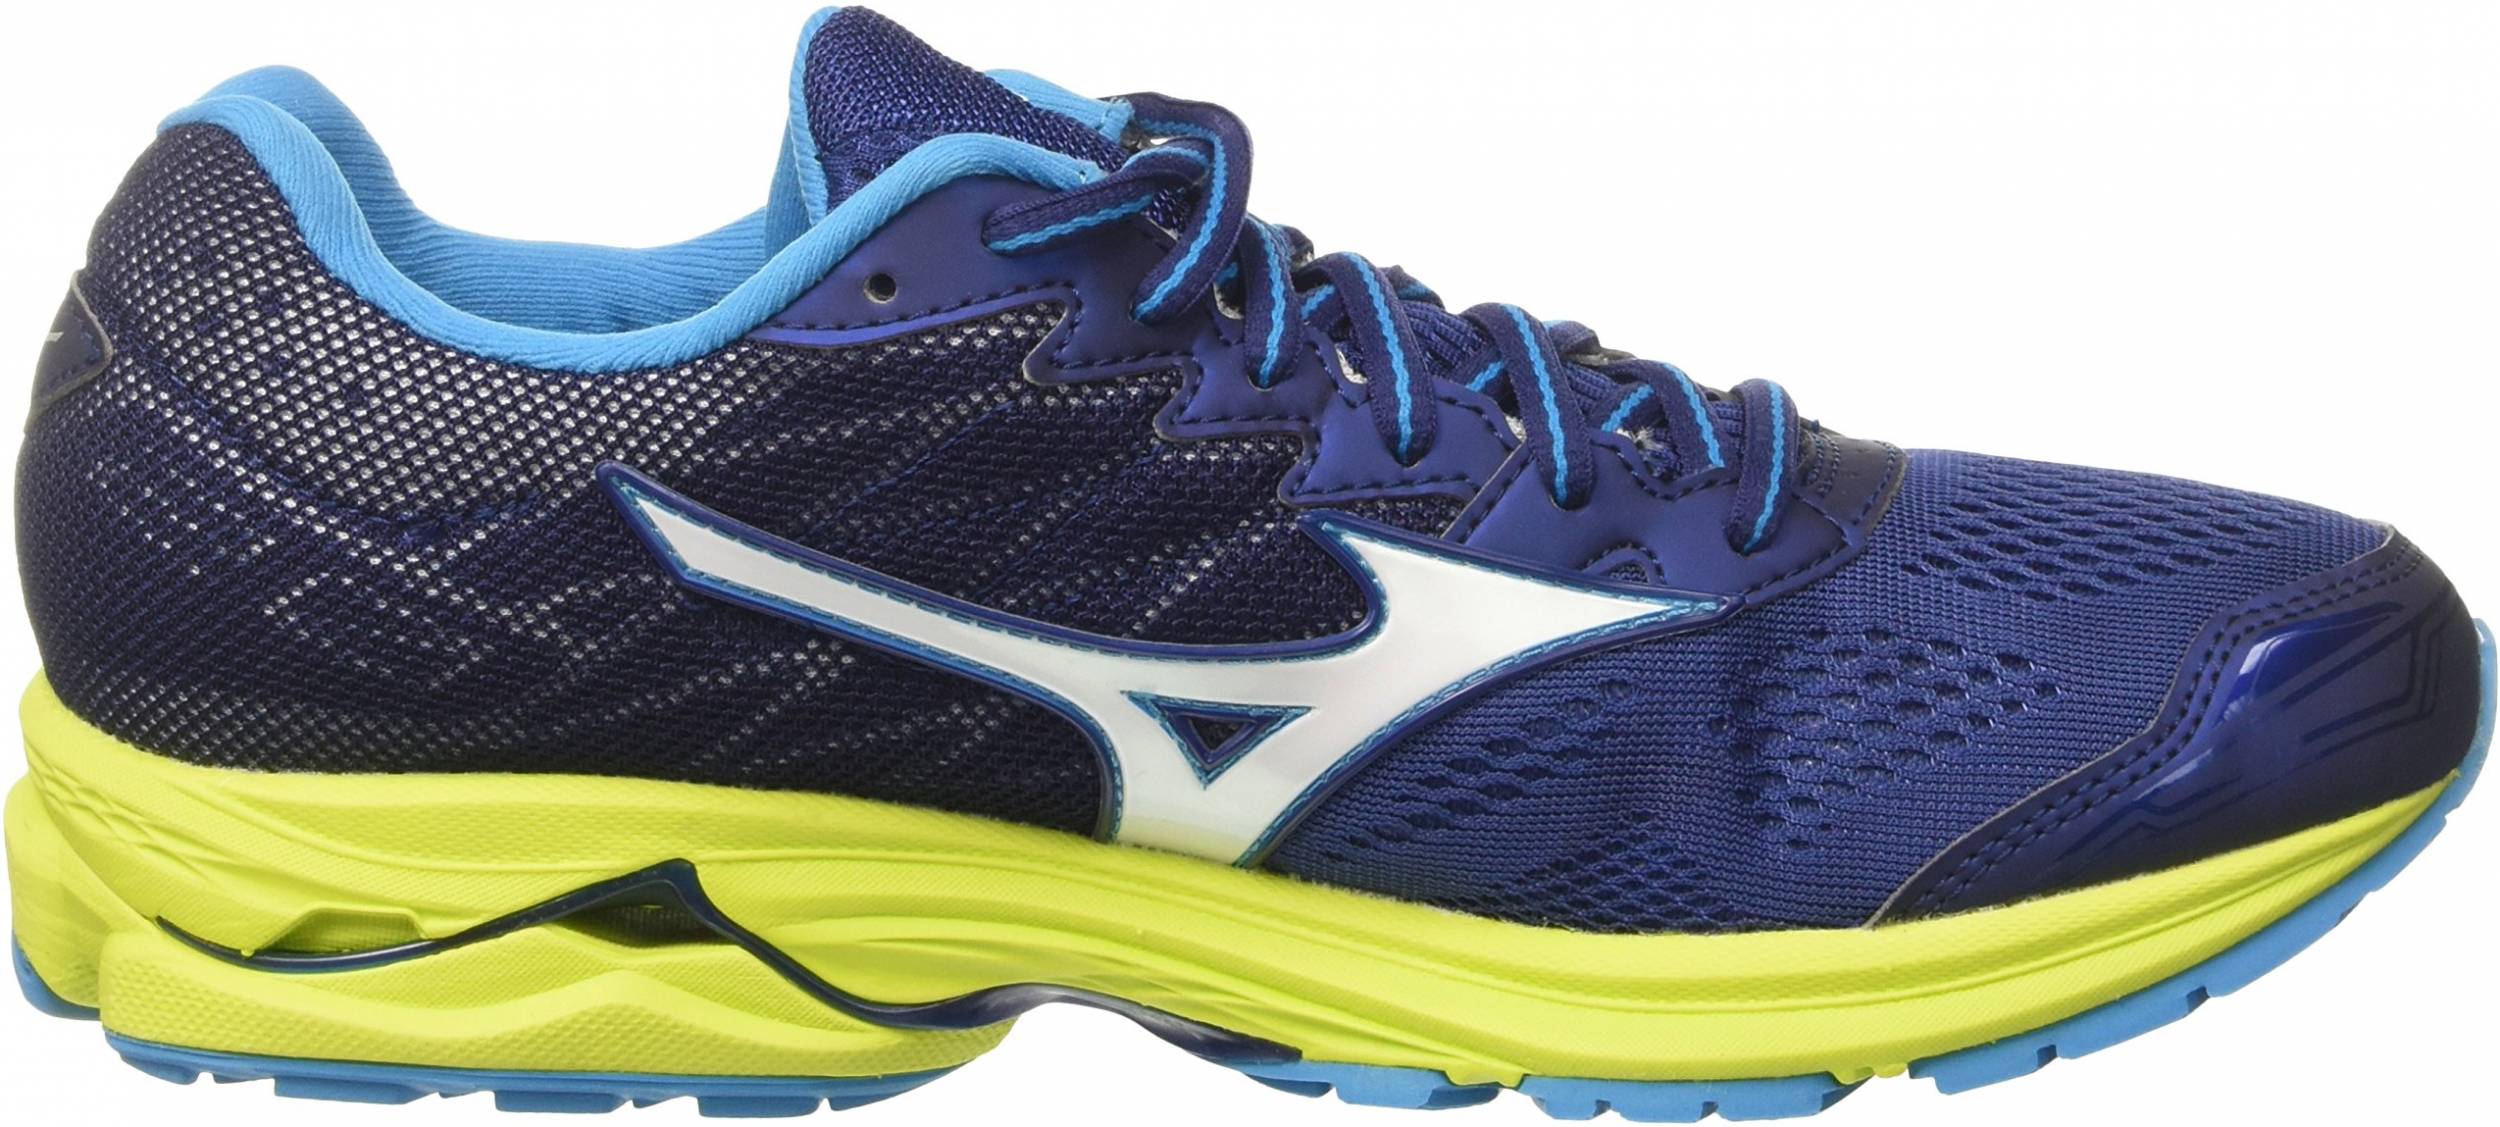 Mizuno Wave Rider 20 Review 2022, Facts 